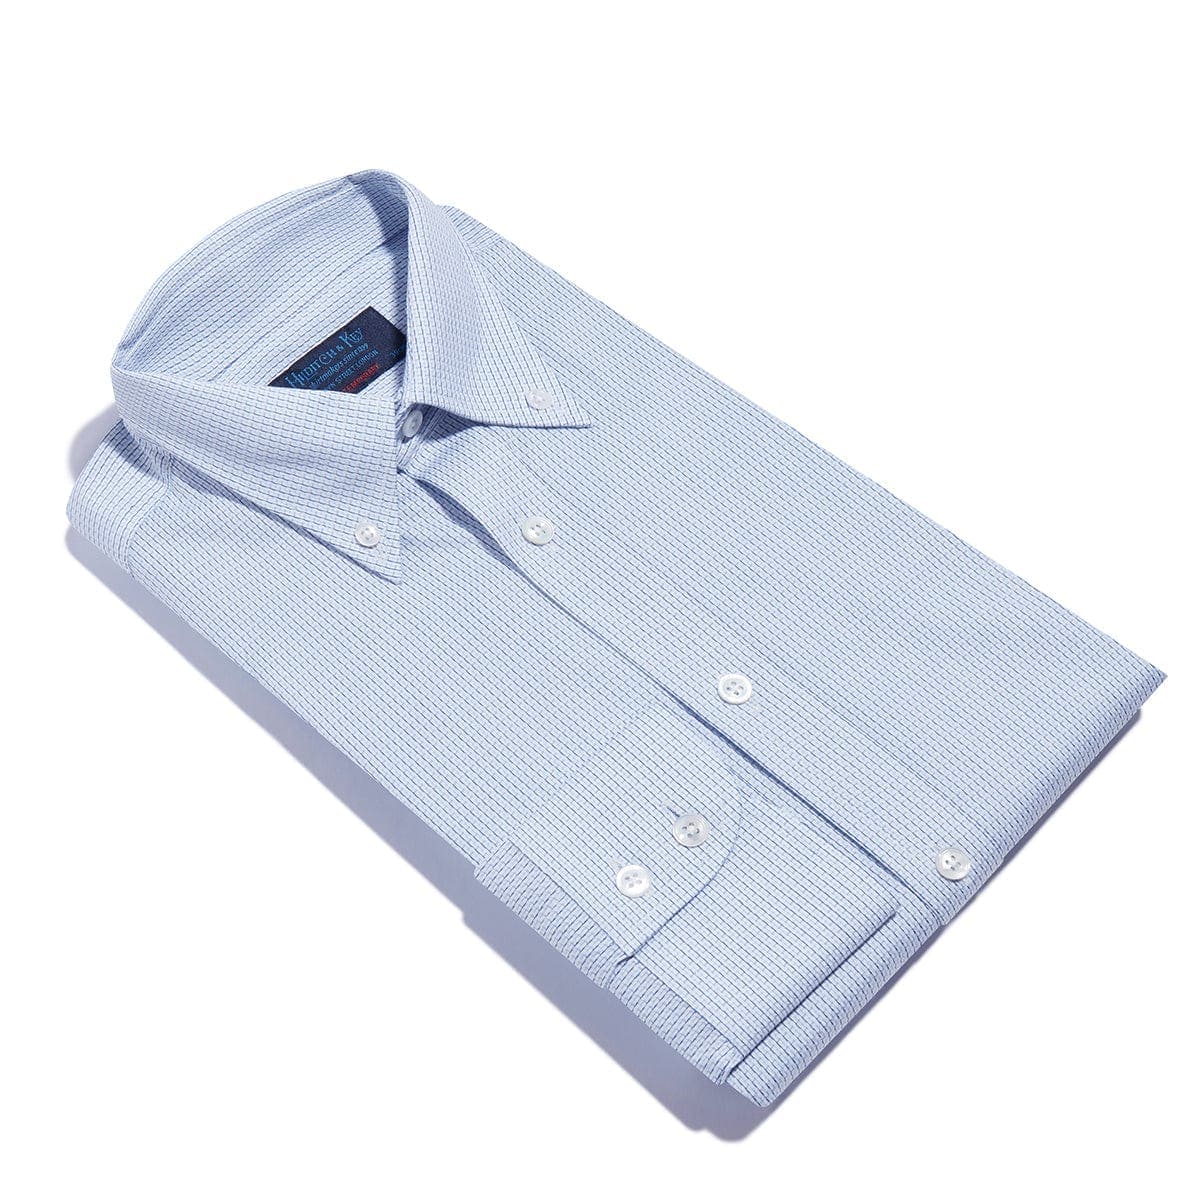 Contemporary Fit, Button Down Collar, 2 Button Cuff Shirt In White & Blue Neat Basket Weave